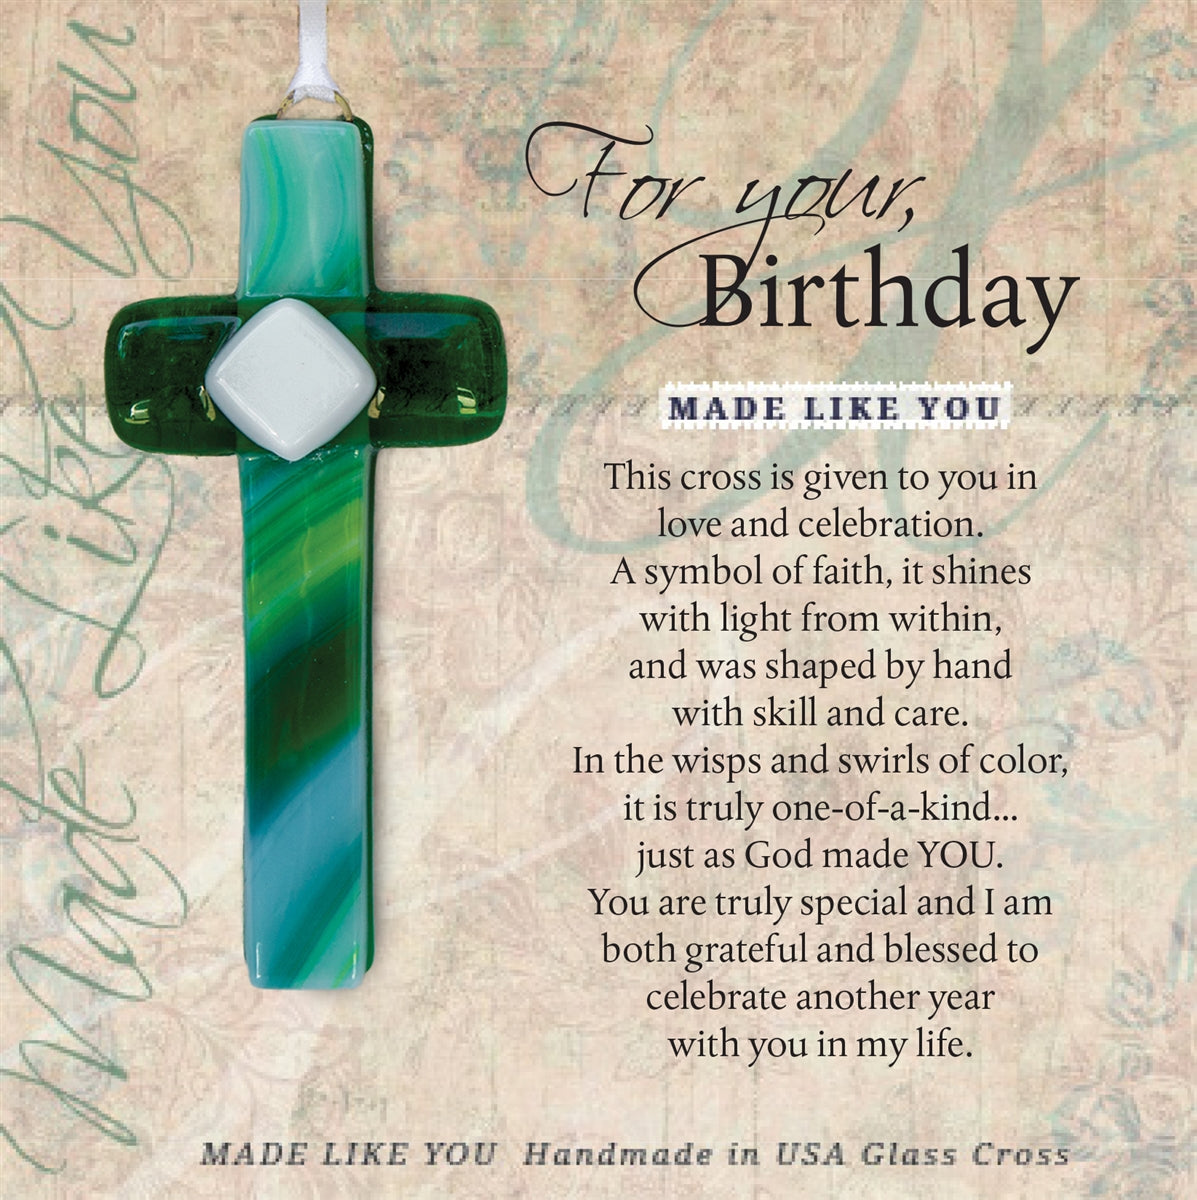 Green glass cross and For Your, Birthday sentiment.